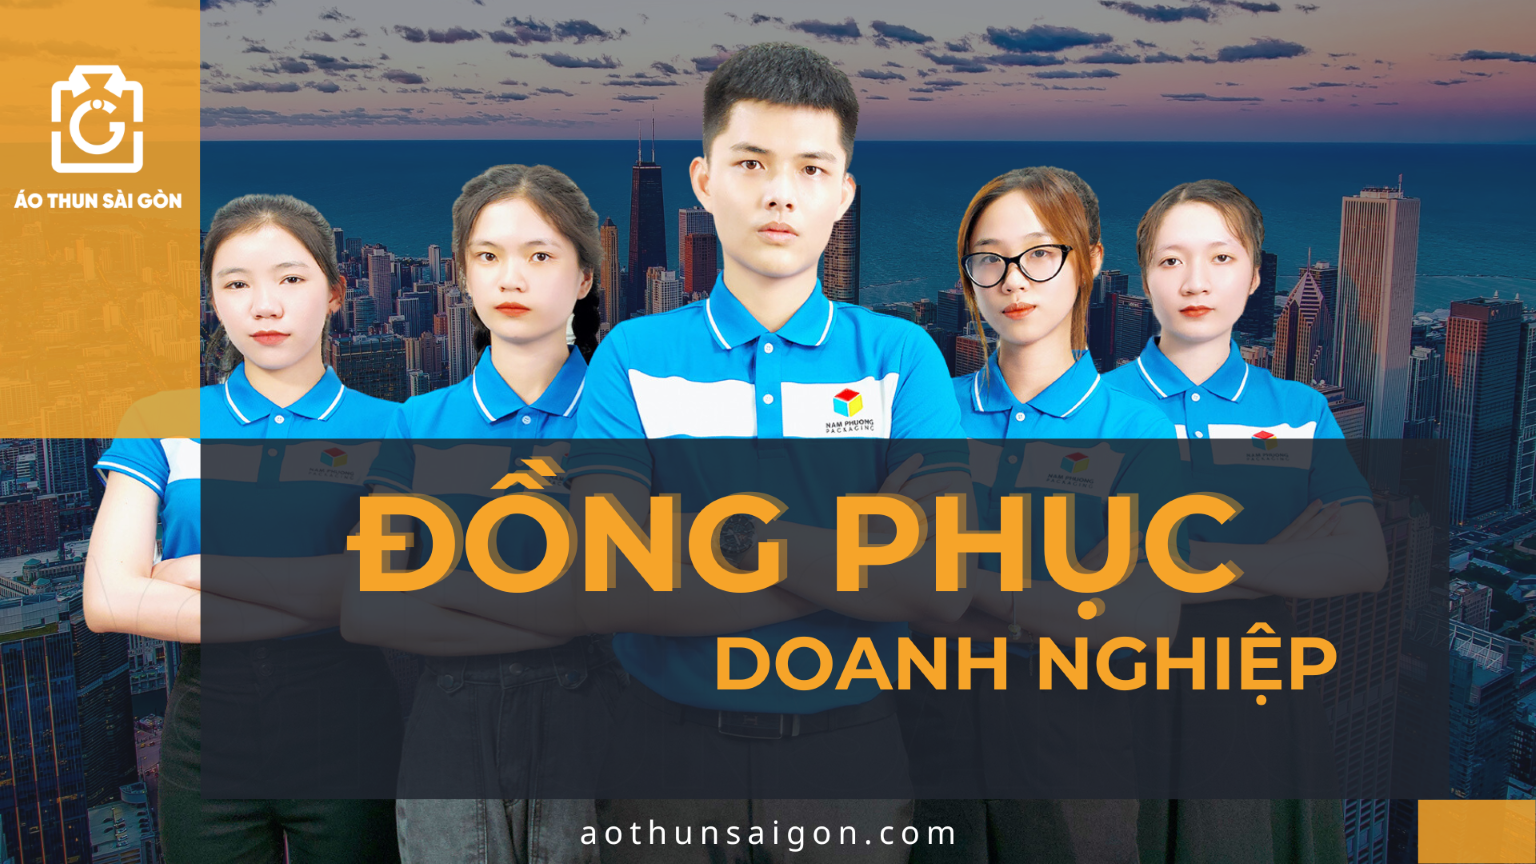 Video Gallery - Cac mau dong phuc an tuong 2023